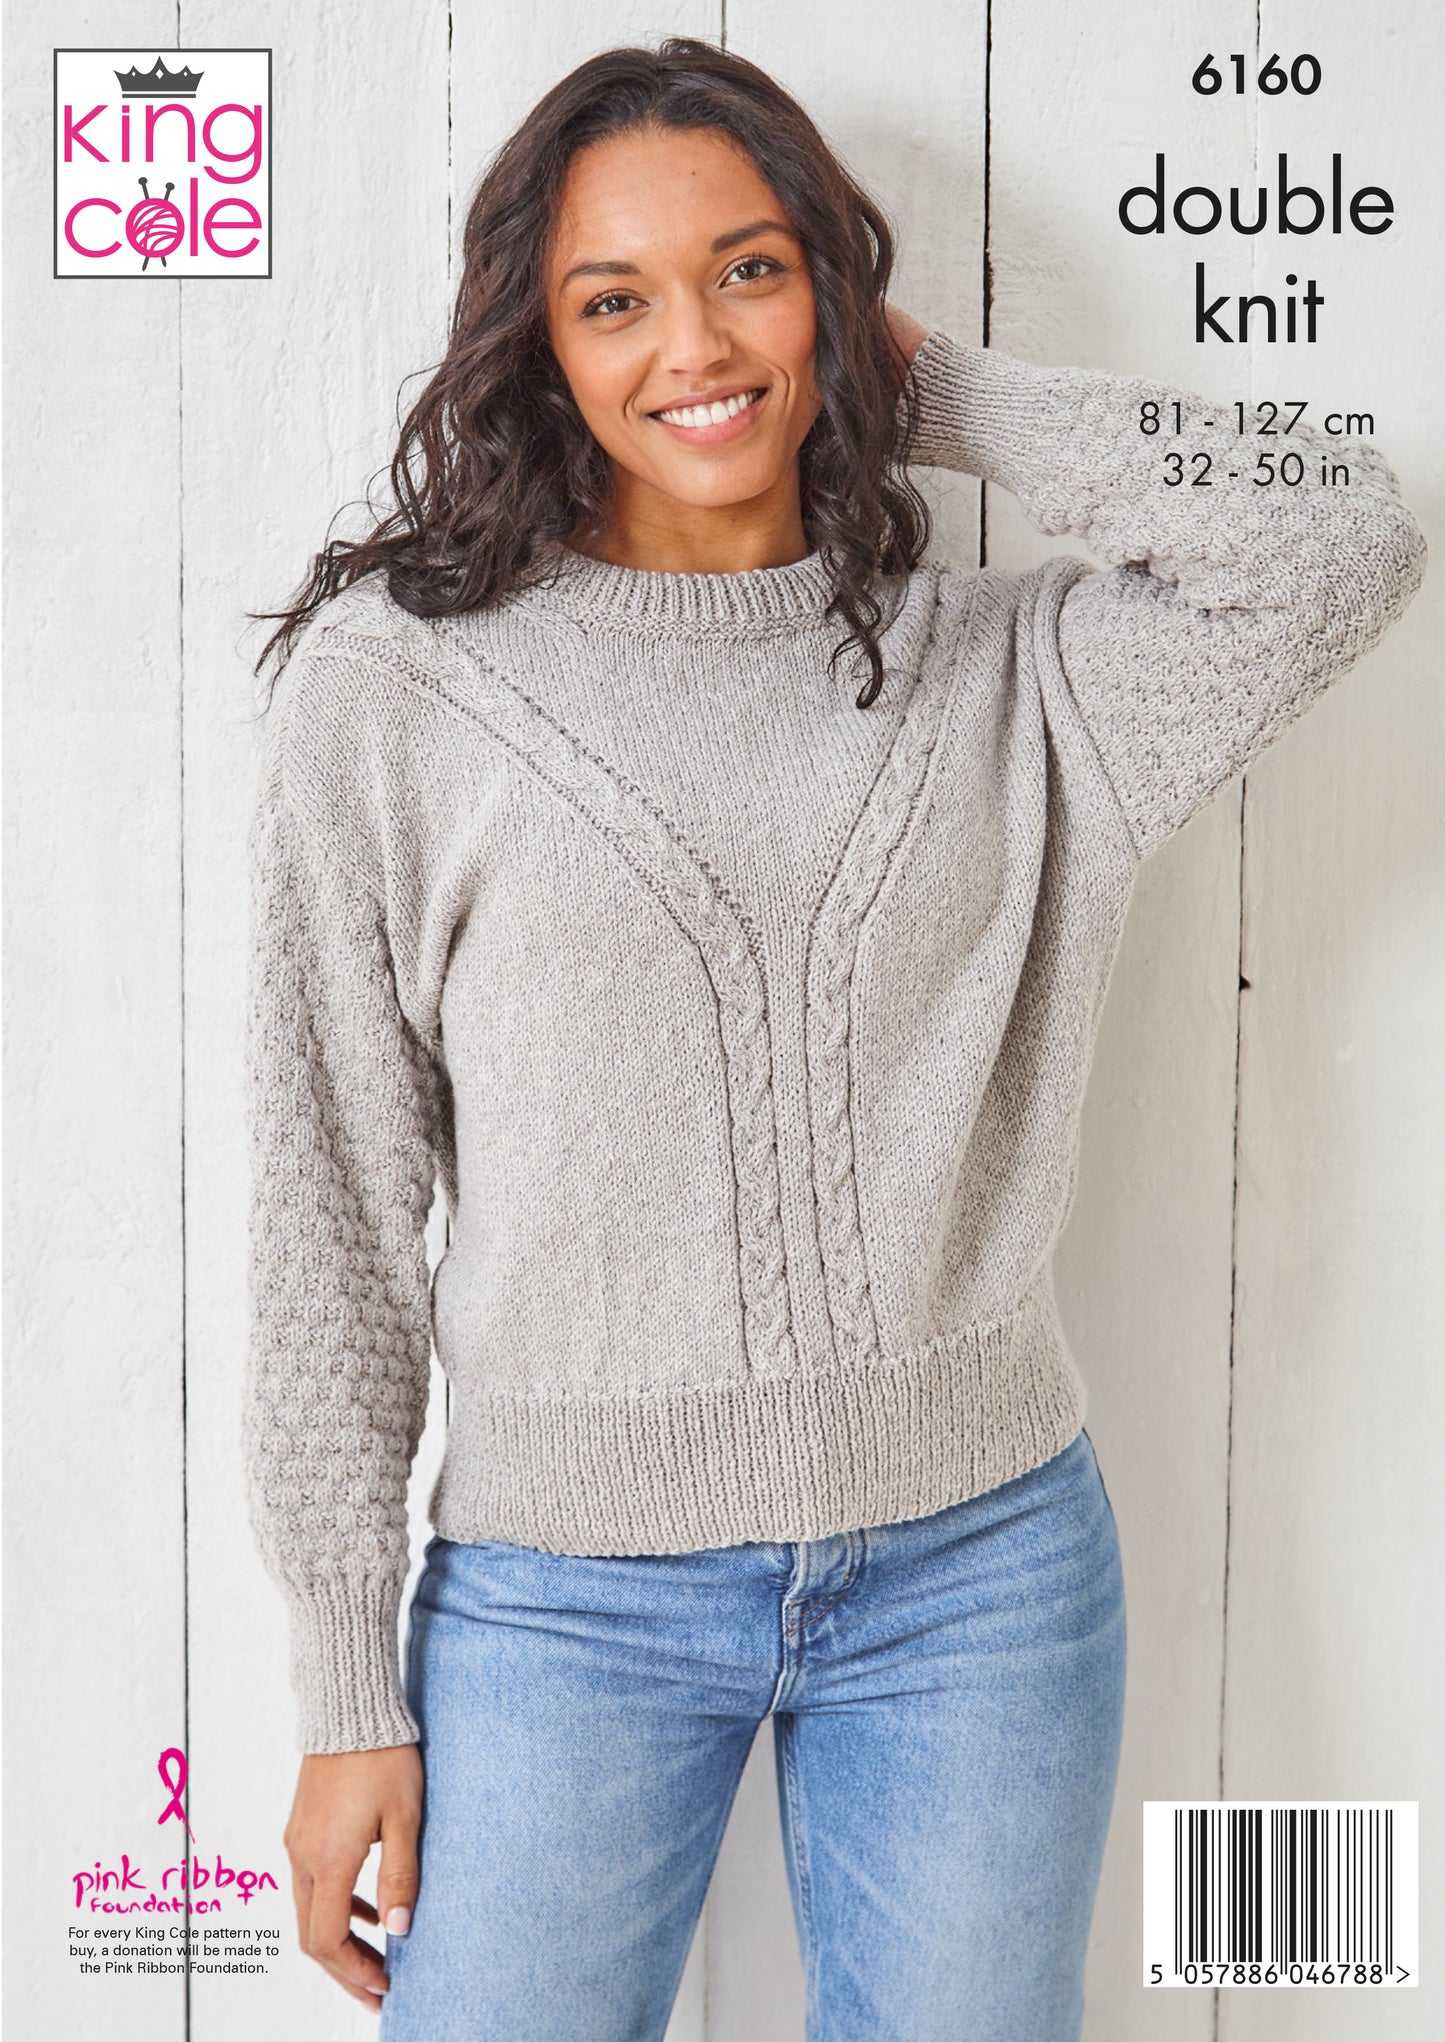 King Cole Sweater & Cardigan knitted in King Cole SiImply Denim DK - 6160